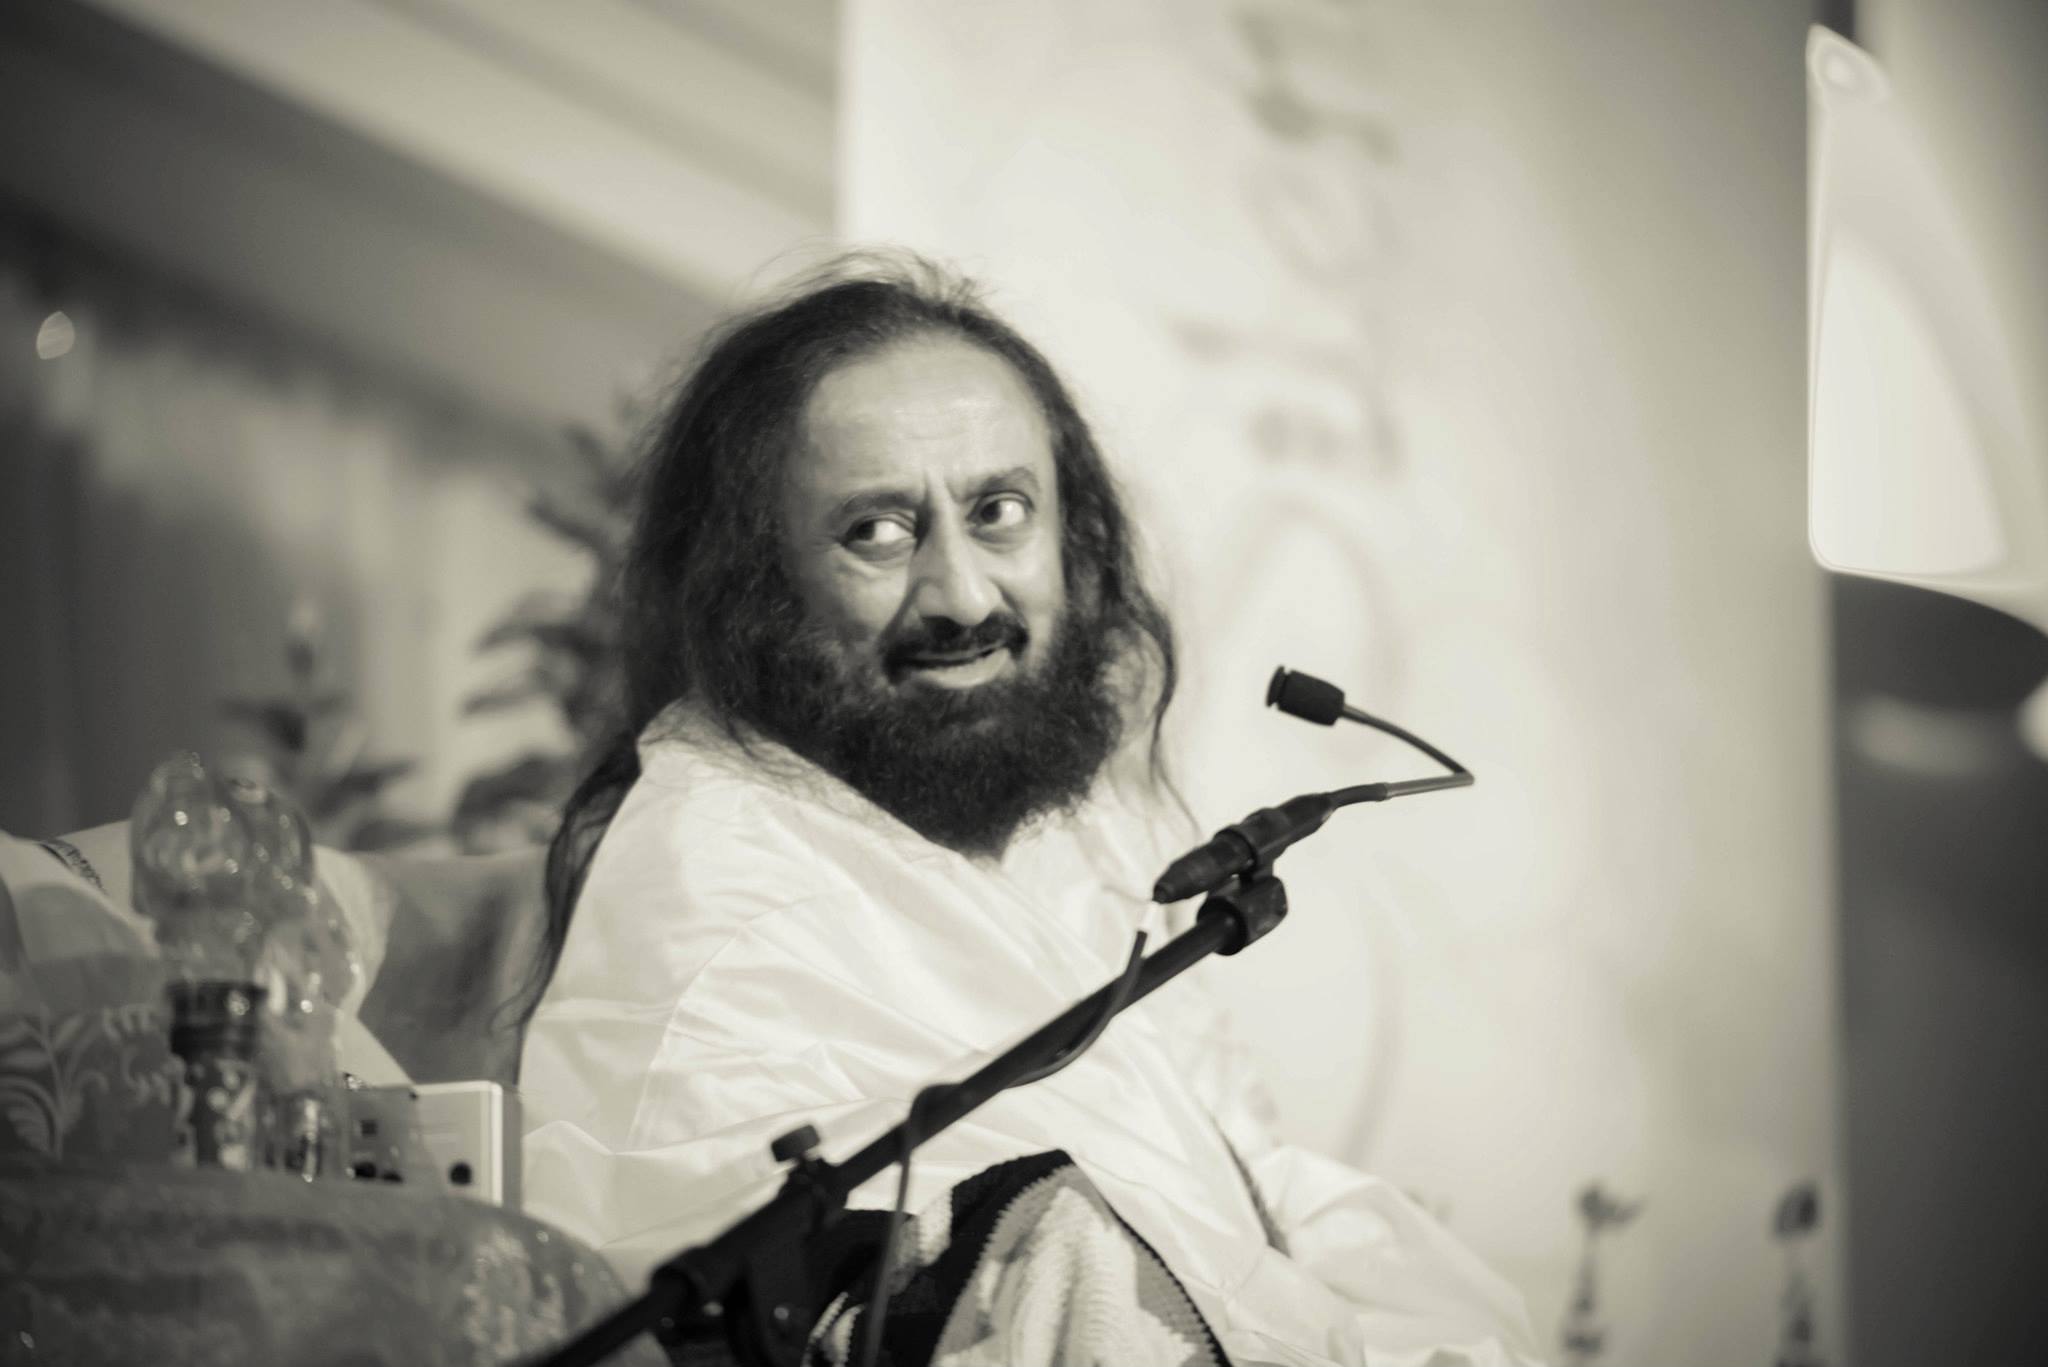 You are always taken care of | Sri Sri Miracles